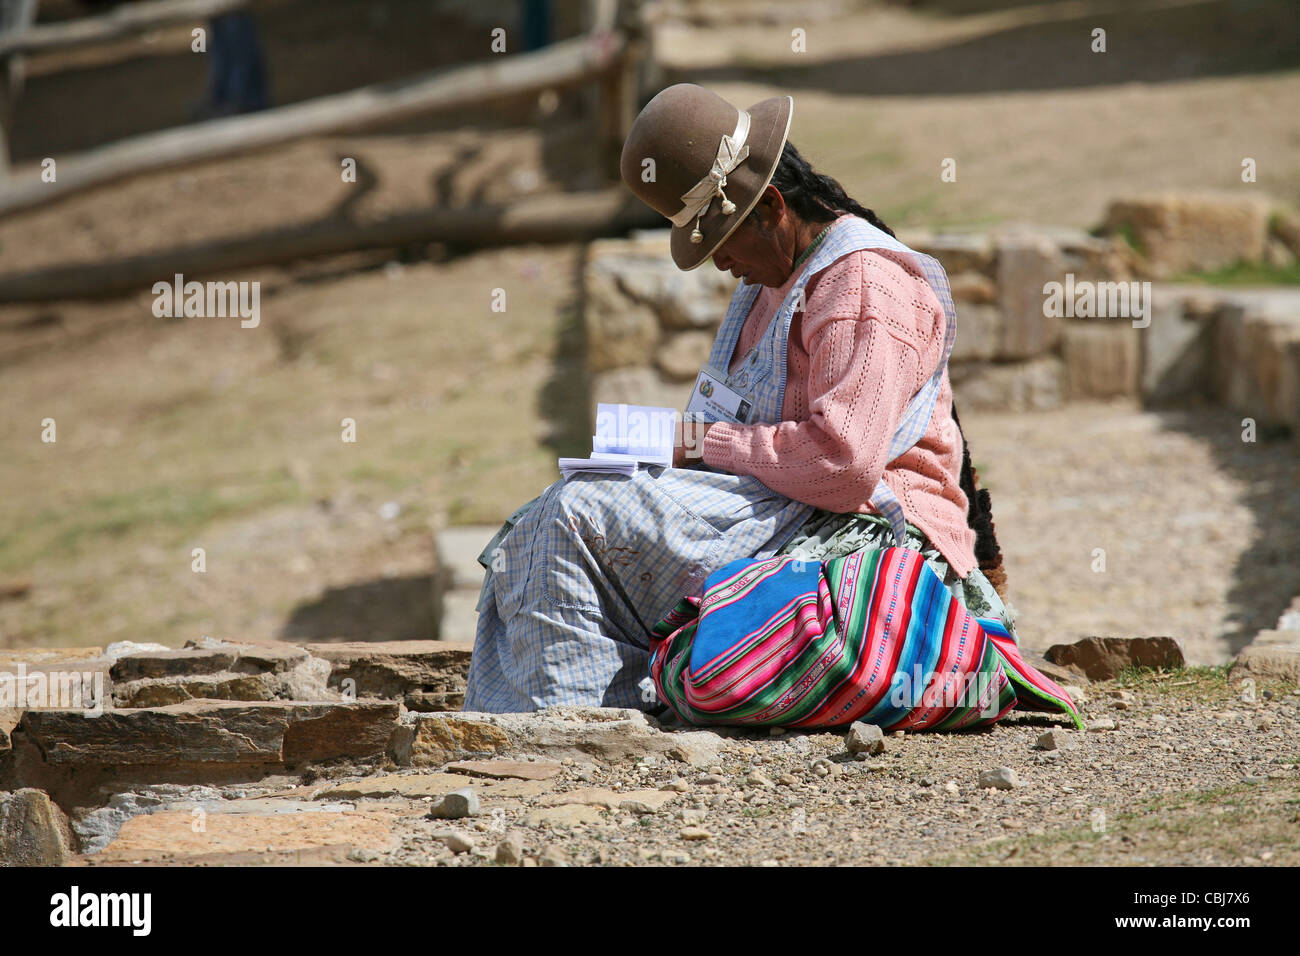 Traditional dressed native Bolivian woman with bowler hat in Bolivia Stock Photo